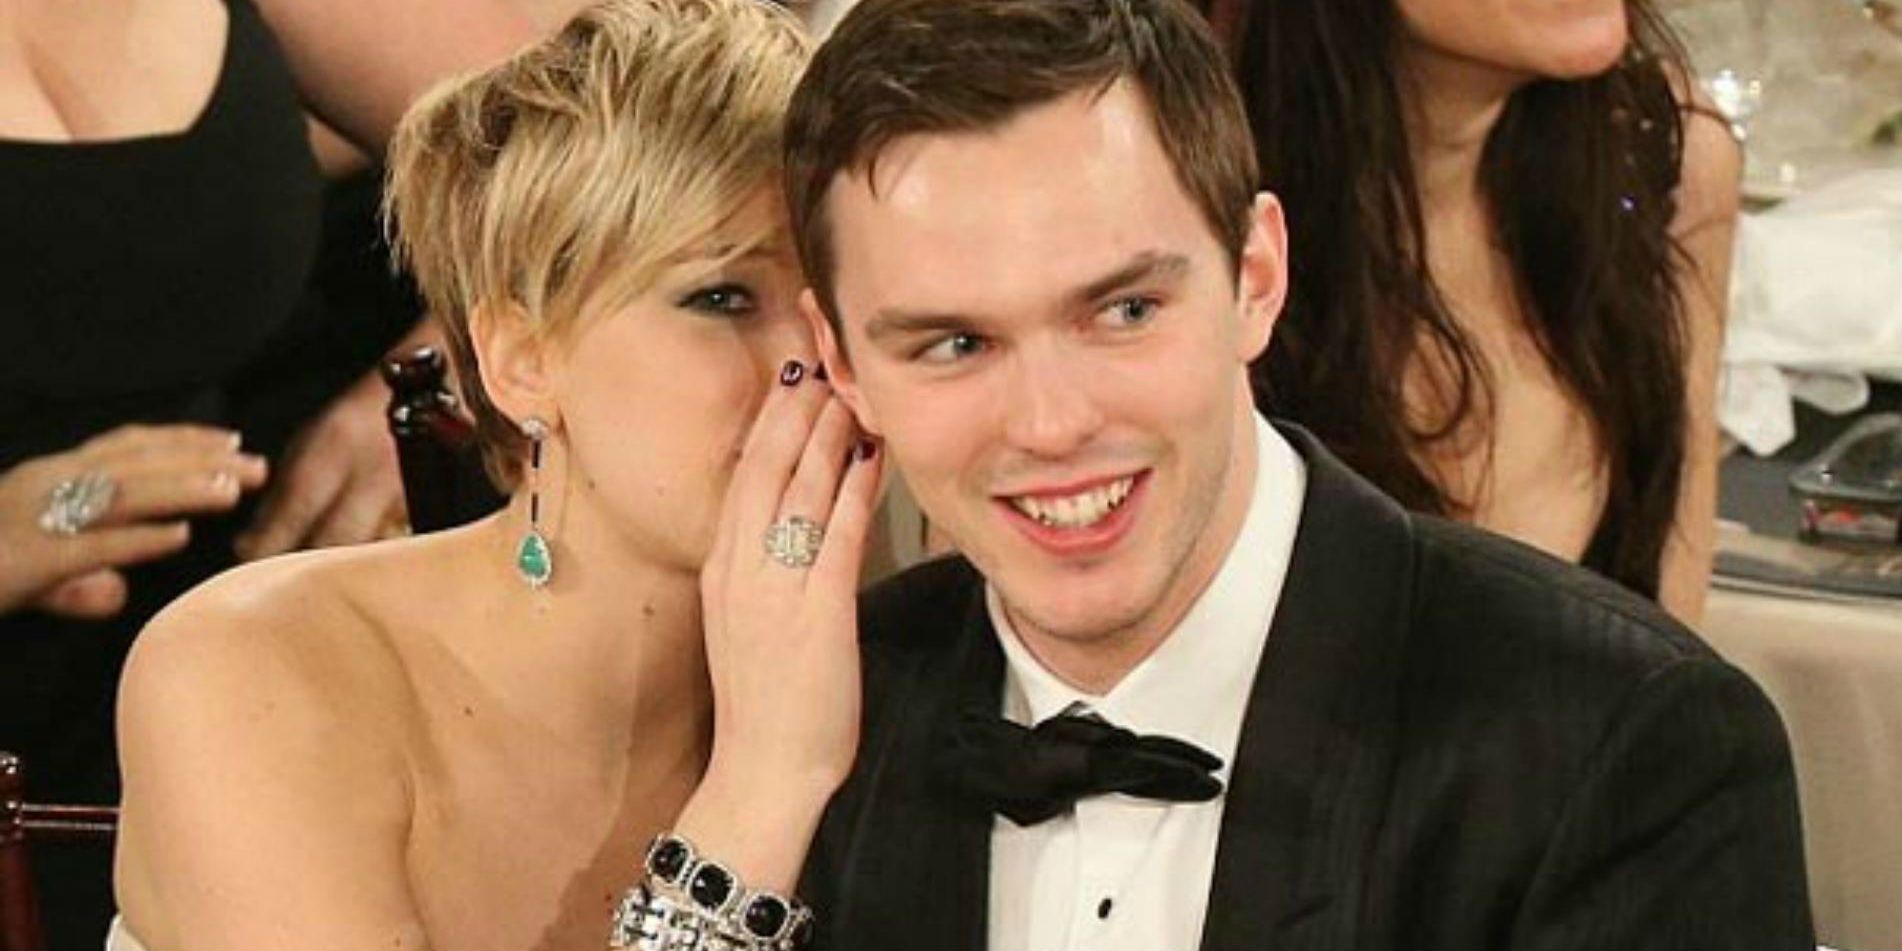 Jennifer Lawrence and Nicholas Hoult at awards show